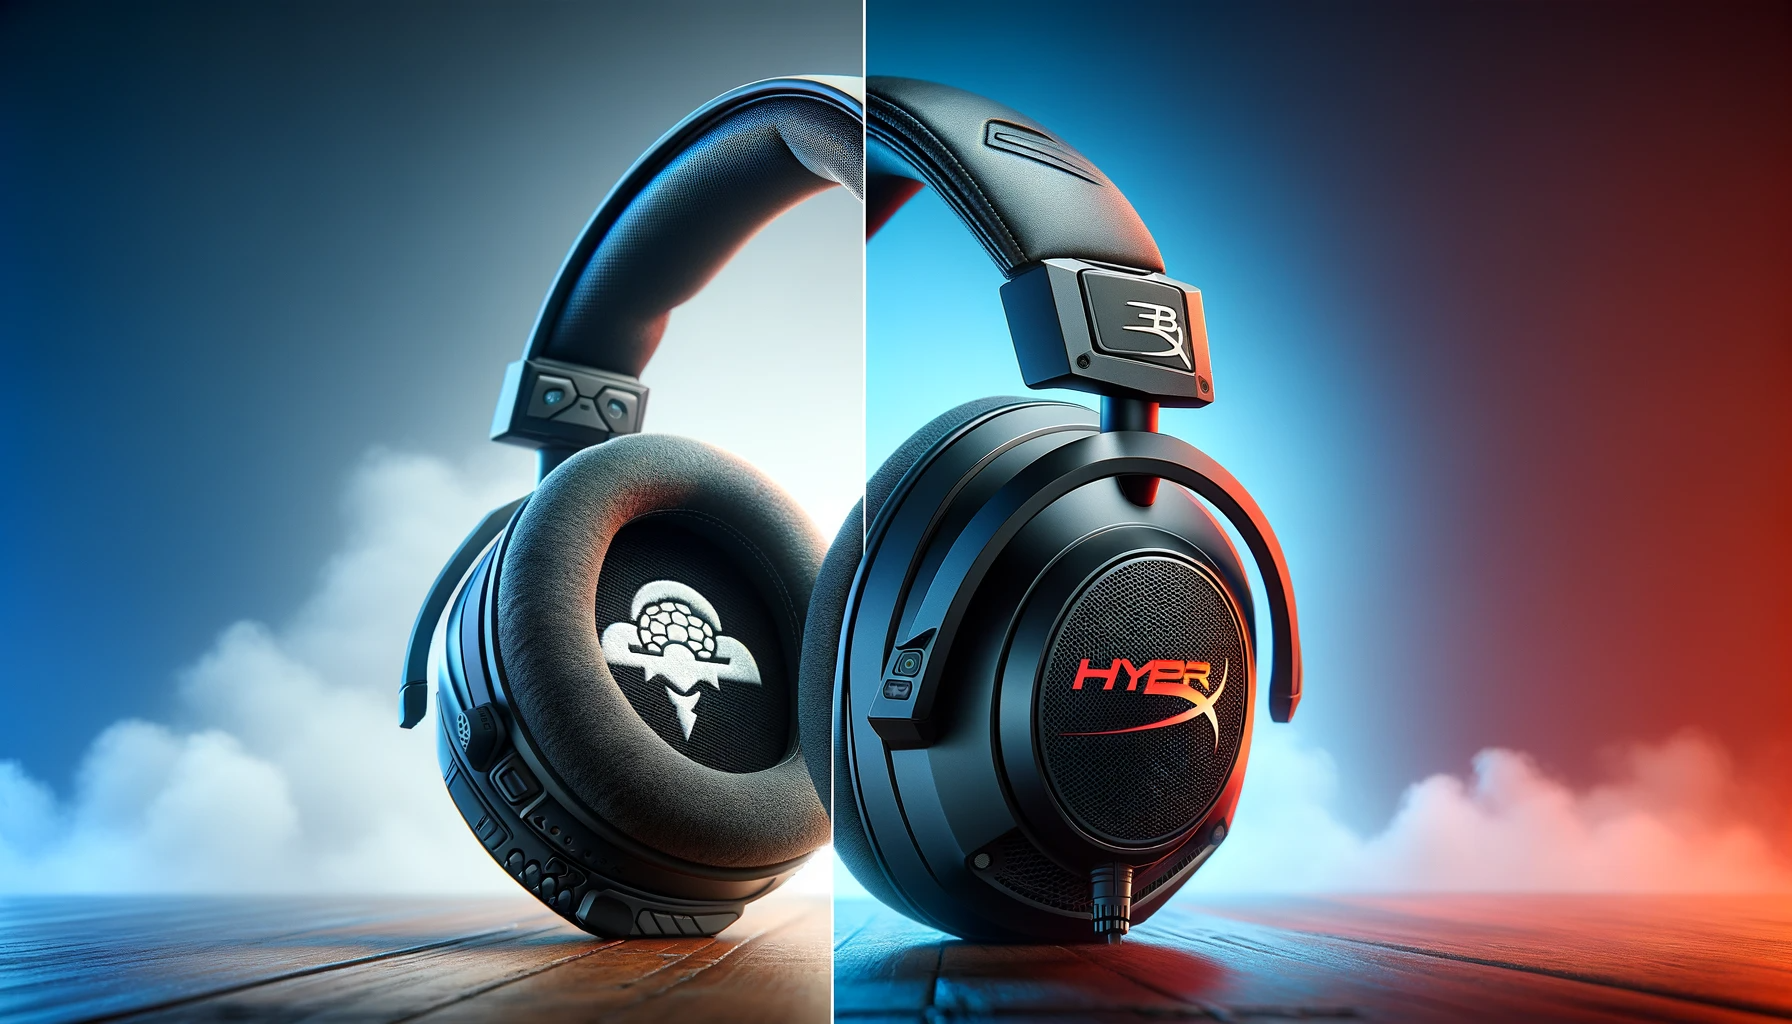 Split-screen image with Turtle Beach gaming headset on the left, highlighting its robust and unique design, and HyperX Cloud gaming headset on the right, showcasing its sleek, professional look. Both images emphasize the headsets' design, material texture, and comfort.